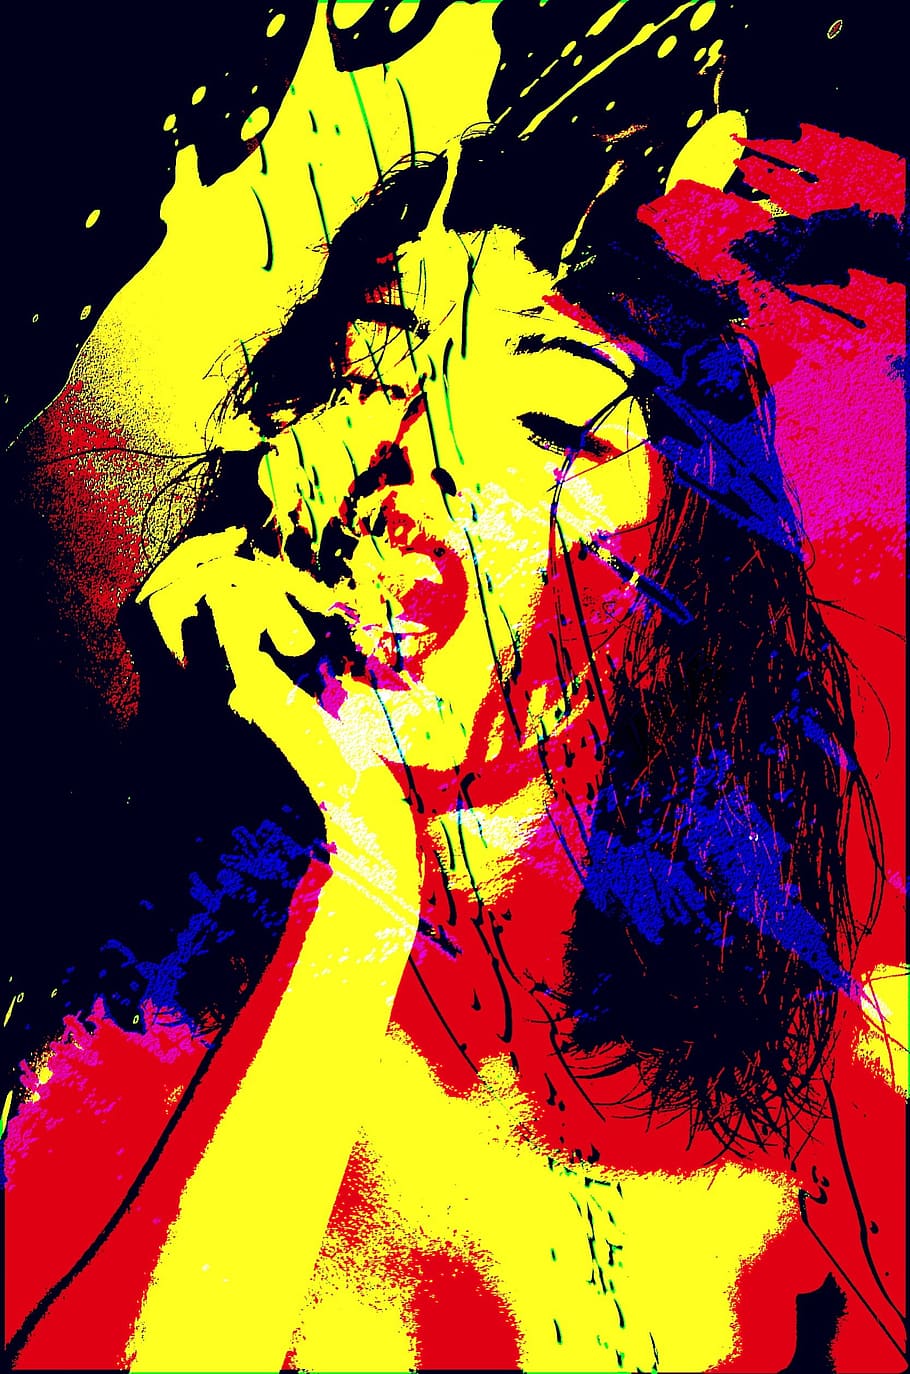 multicolored, woman, wearing, red, lipstick painting, pop art, color, artistic, sticker, paint